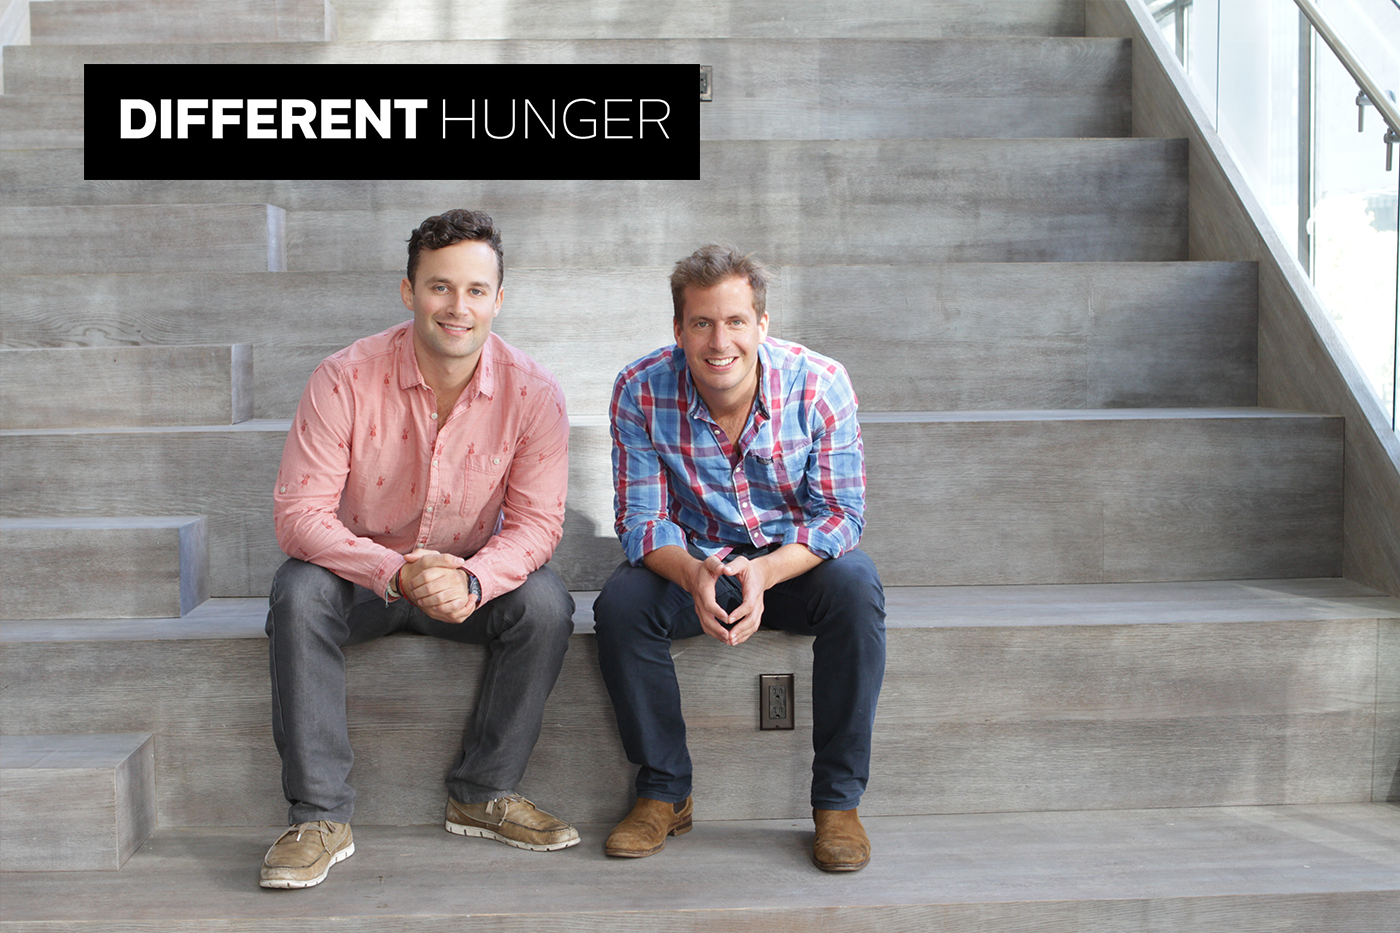 Different Hunger founders sitting on concrete steps